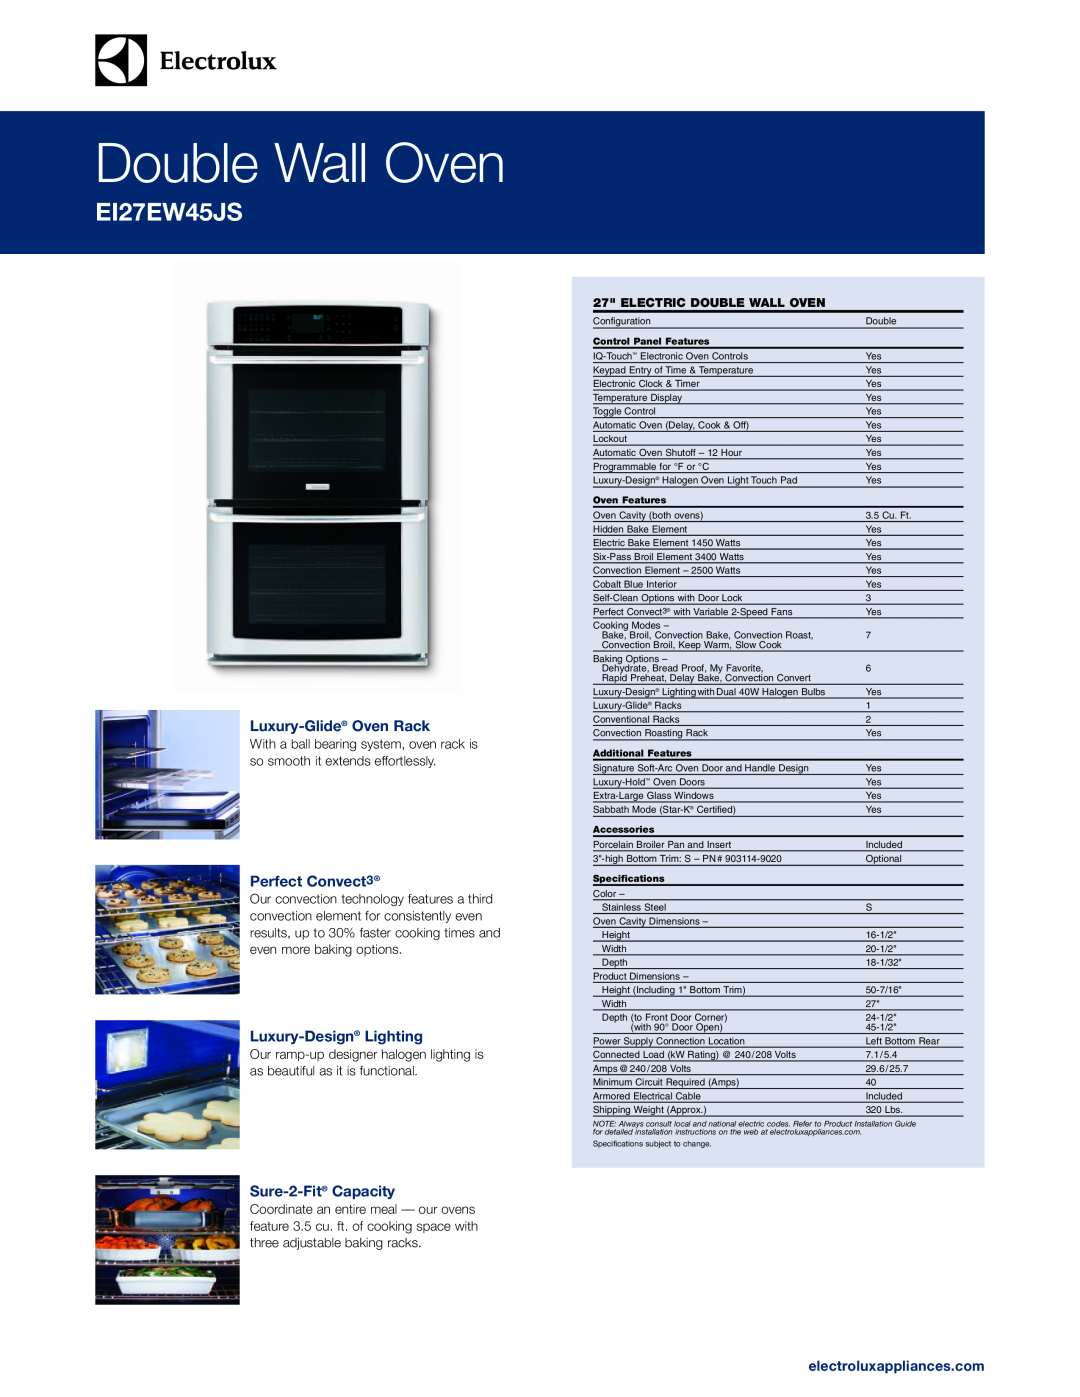 Electrolux EI27EW45JS specifications Luxury-Glide Oven Rack, Perfect Convect3, Luxury-Design Lighting, Sure-2-Fit Capacity 